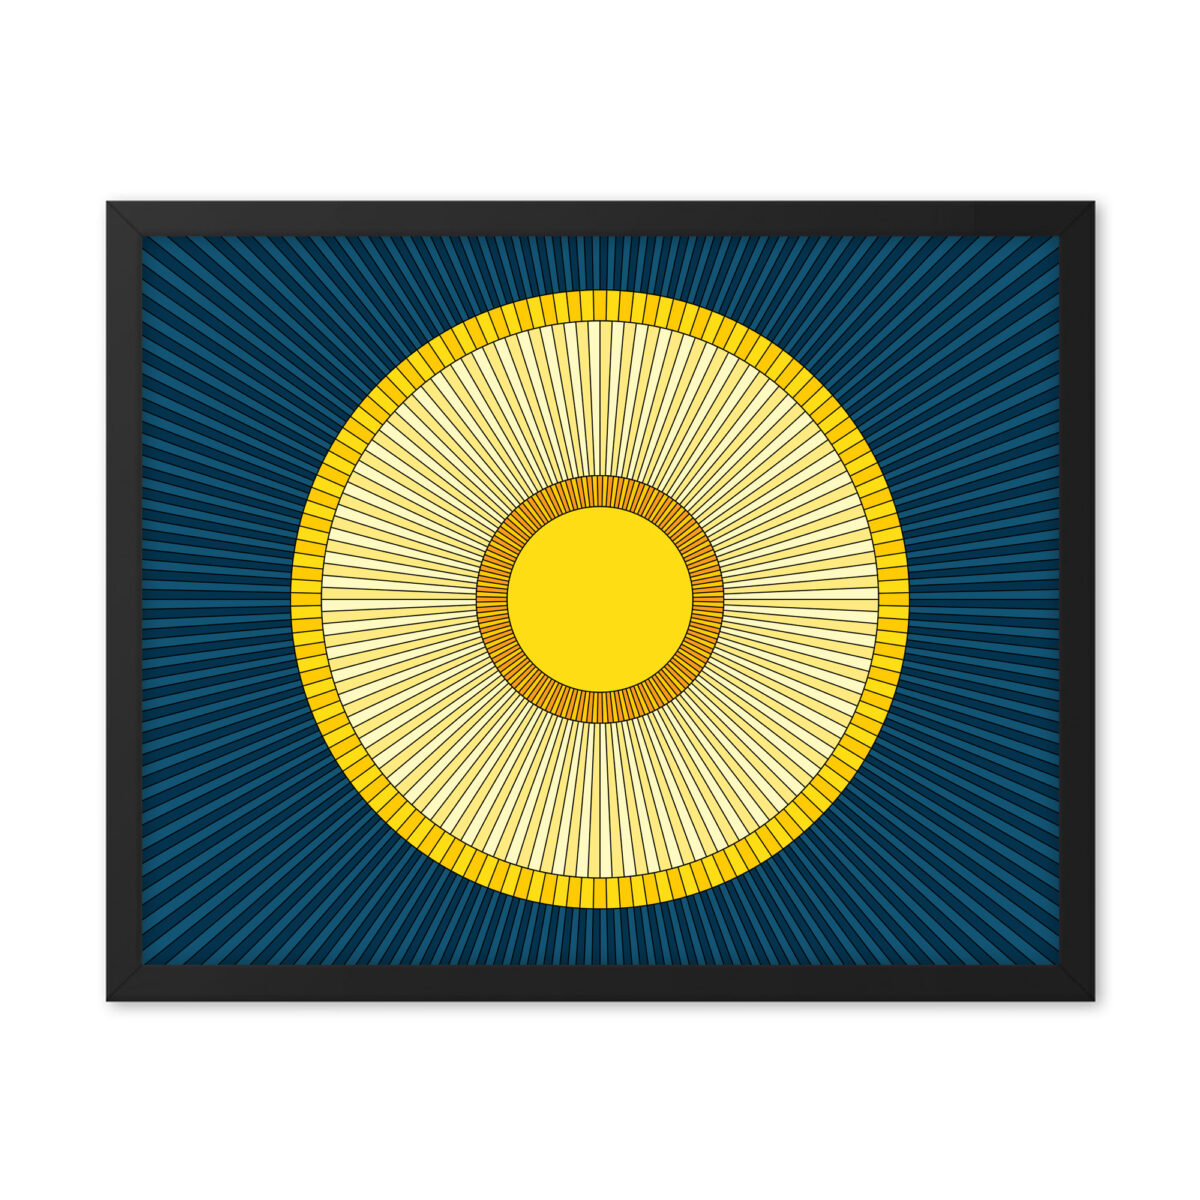 16 inch by 20 inch Solstice sun art print in a black frame